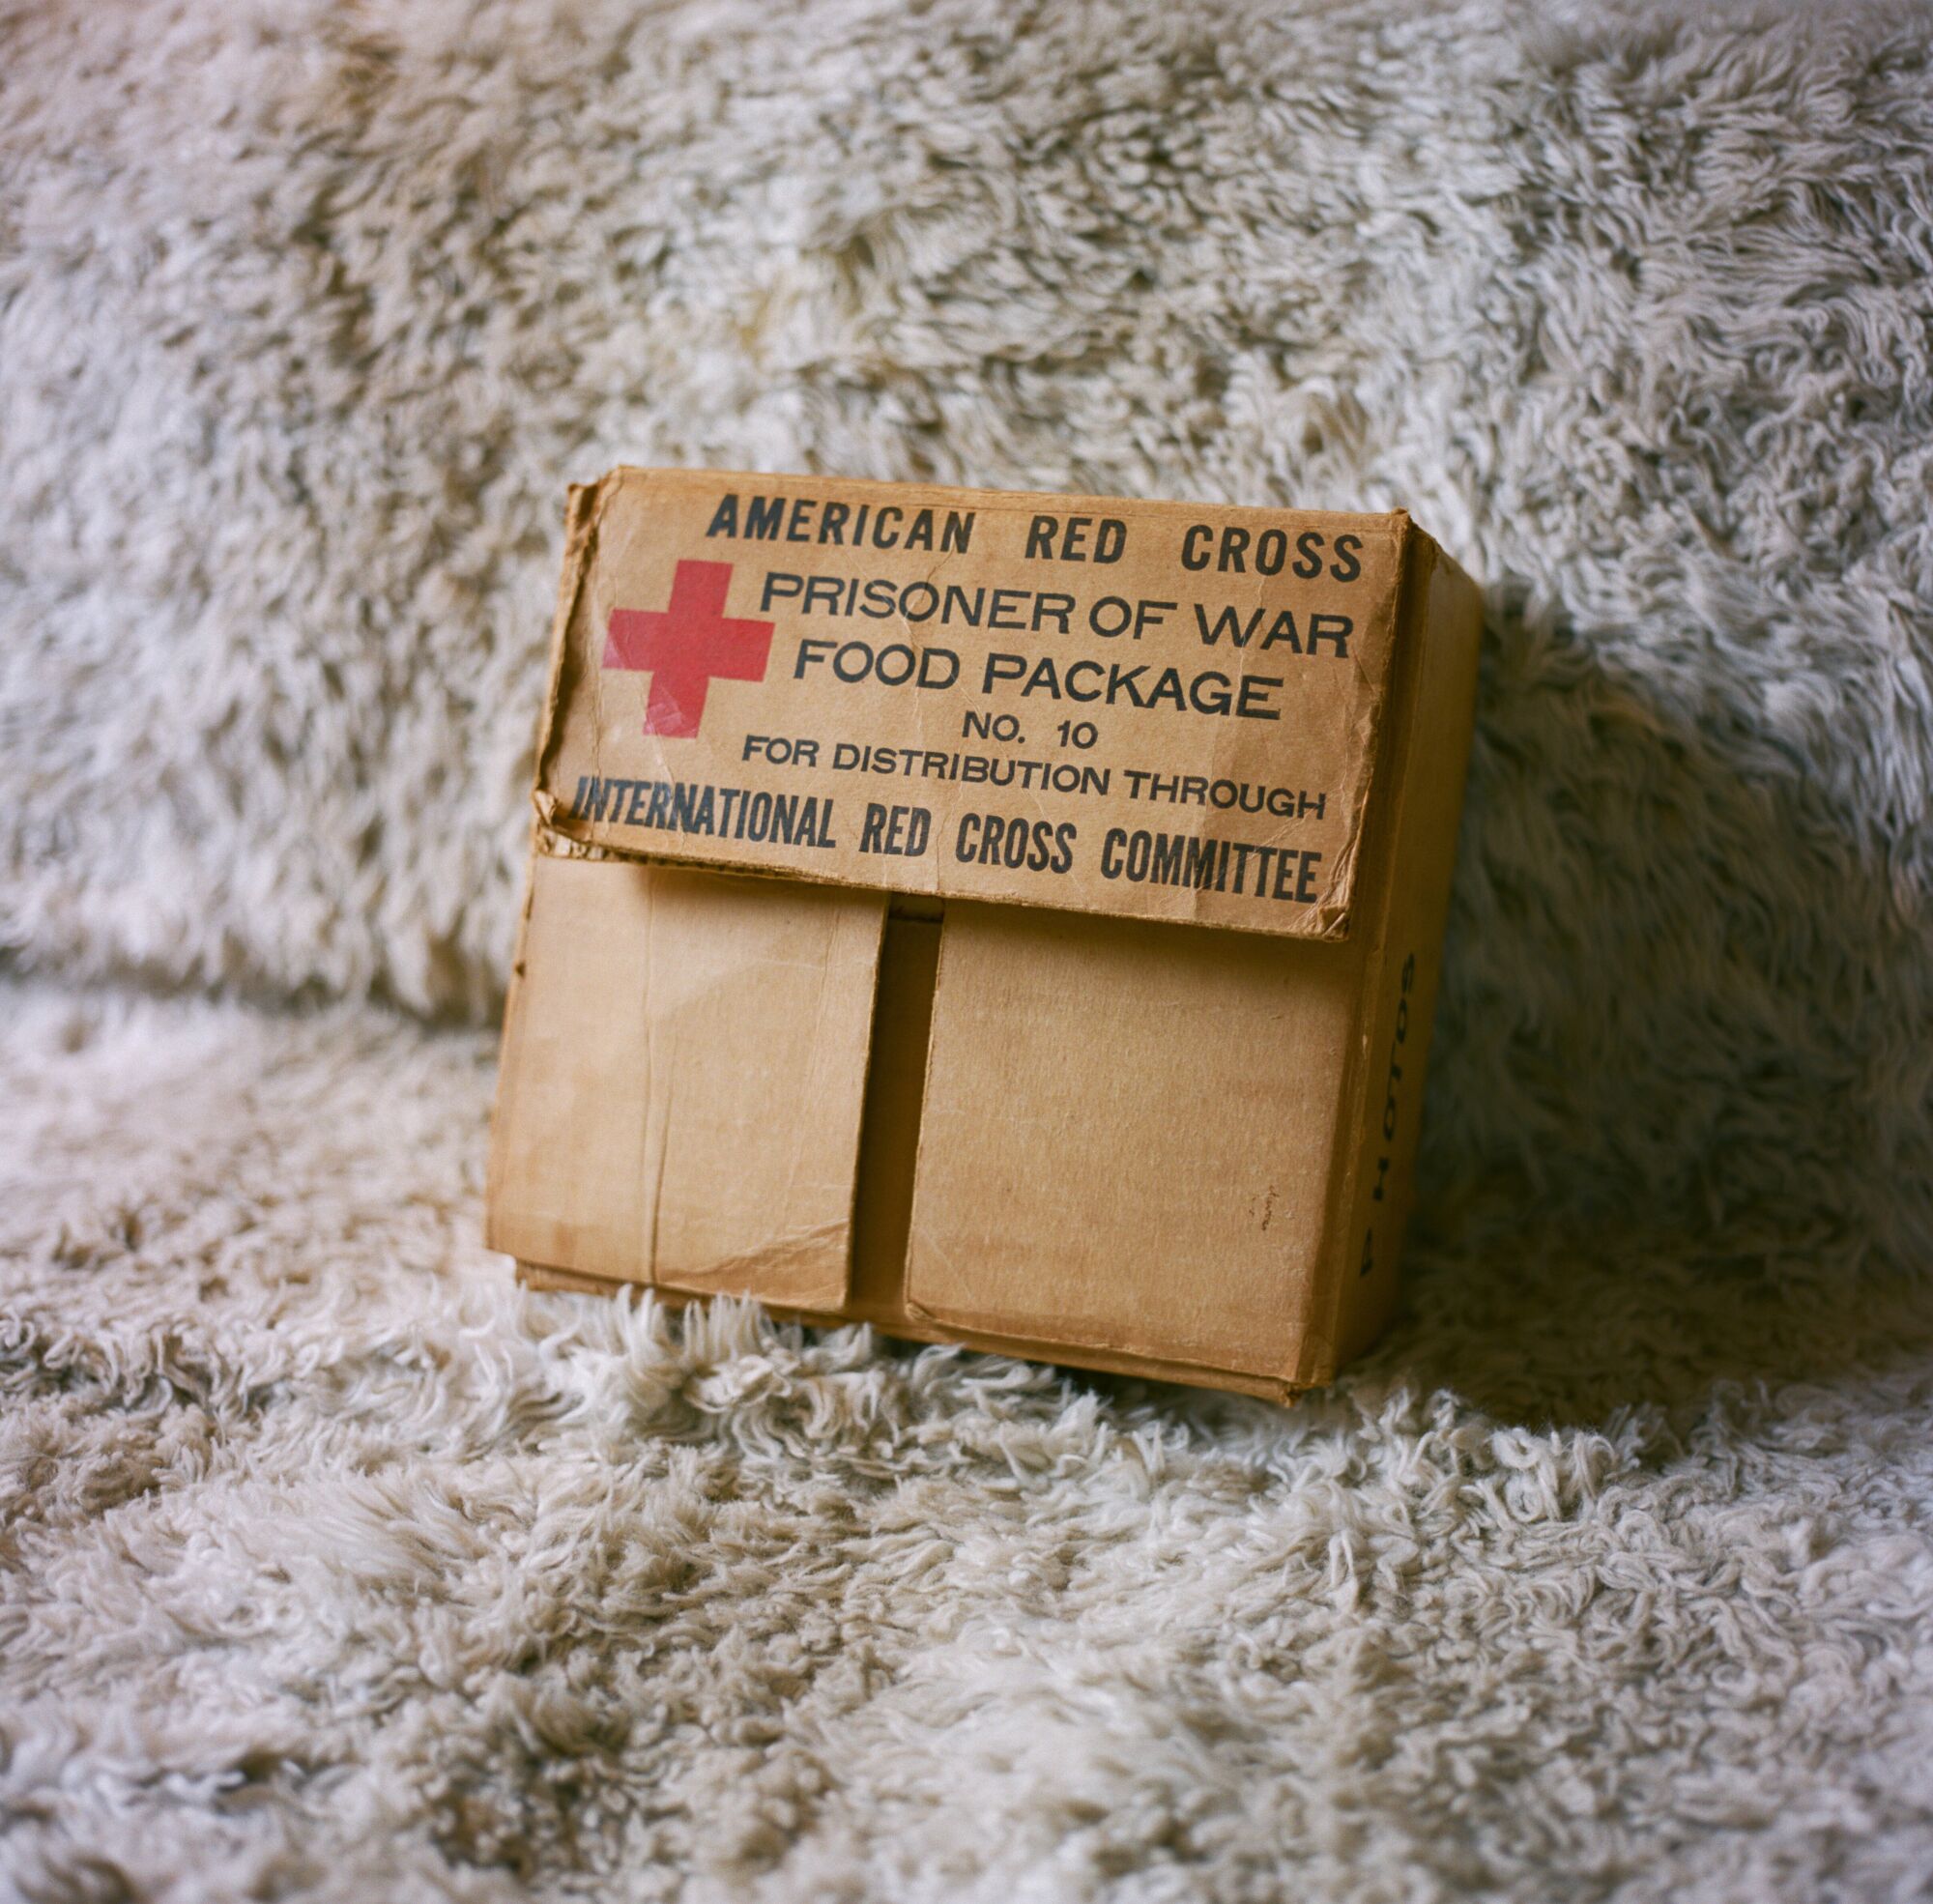 Andrzej’s box inscribed, “American Red Cross Prisoner of War Food Package,” sits on the couch in his living room.